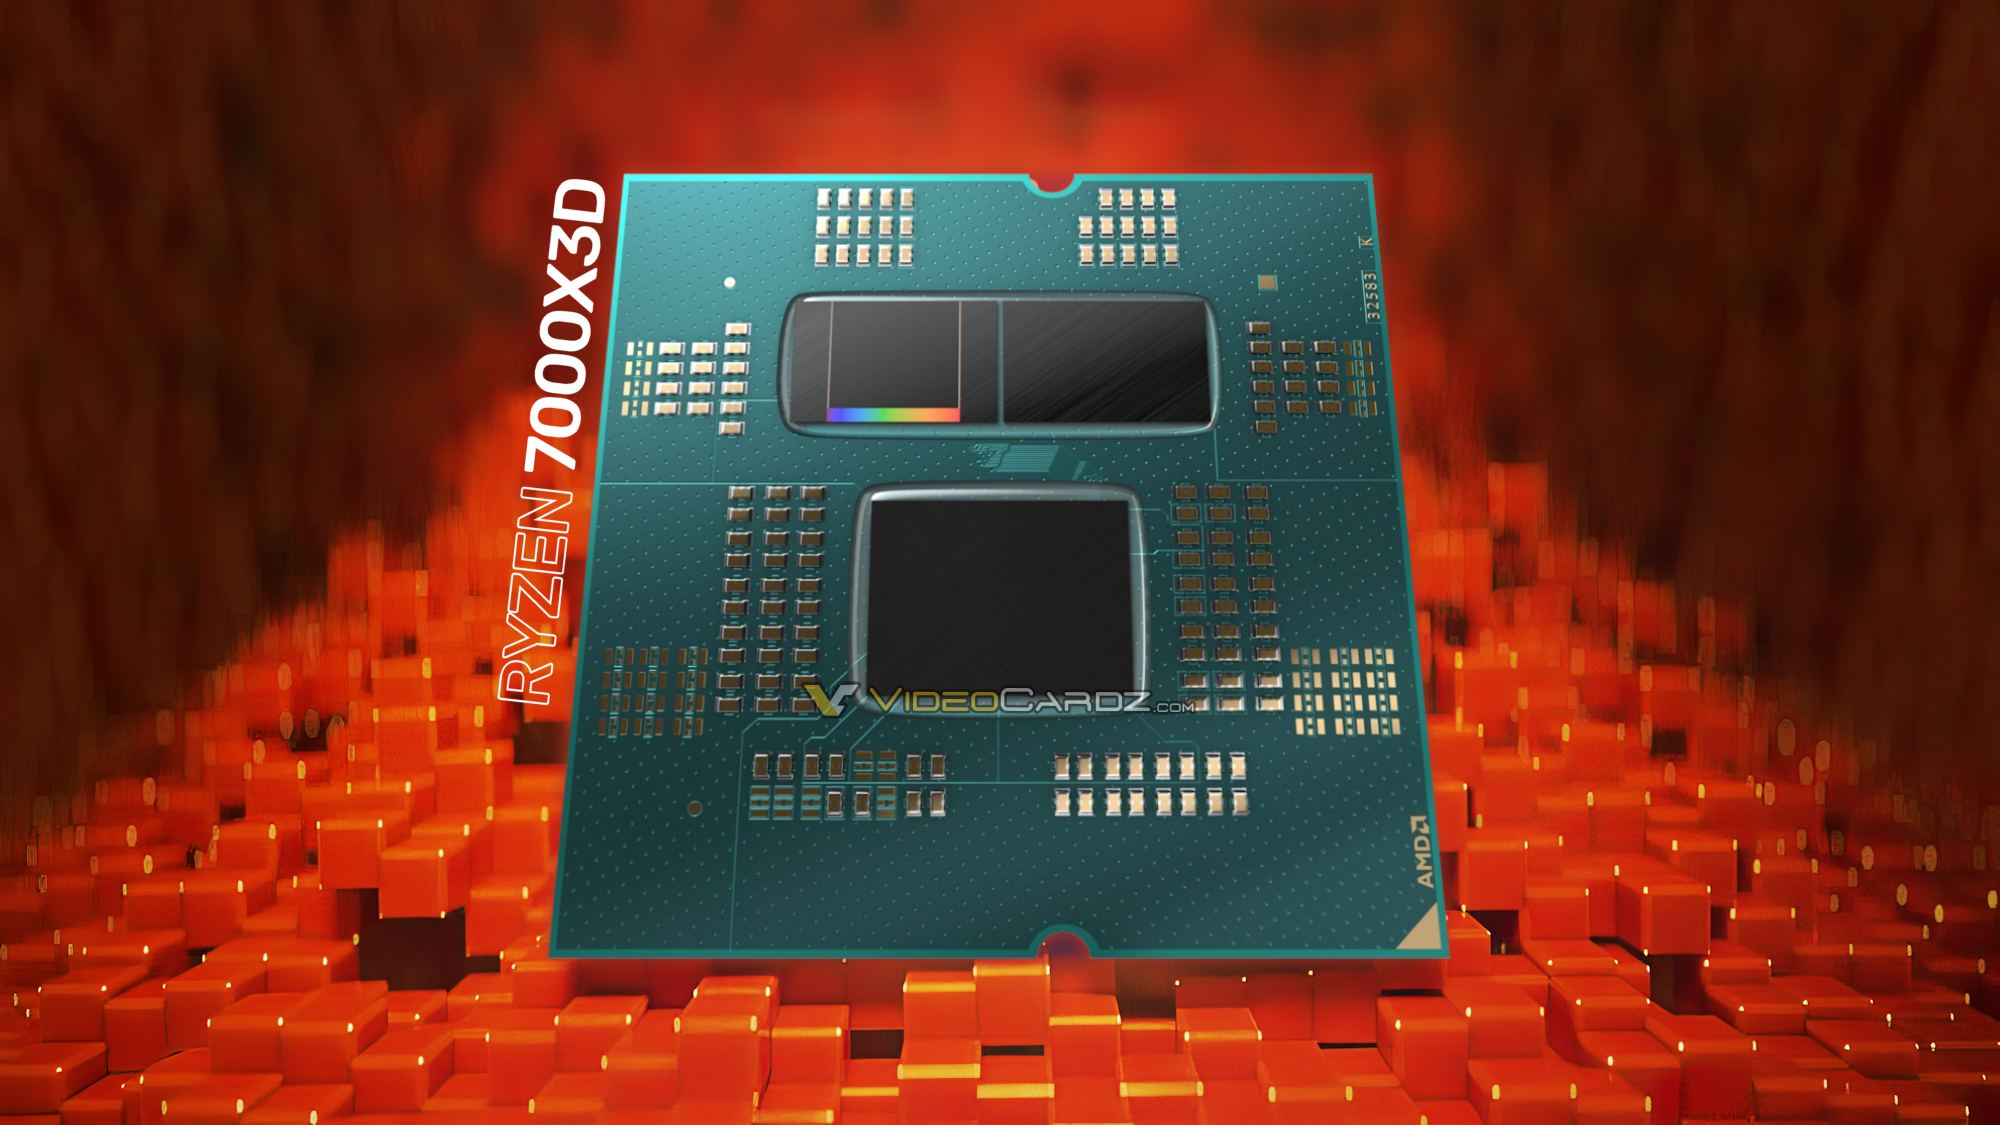 AMD Ryzen 7 5800X3D 3D V-Cache CPU Benchmarks Leak Out, Up To 9% Faster  Than Ryzen 7 5800X